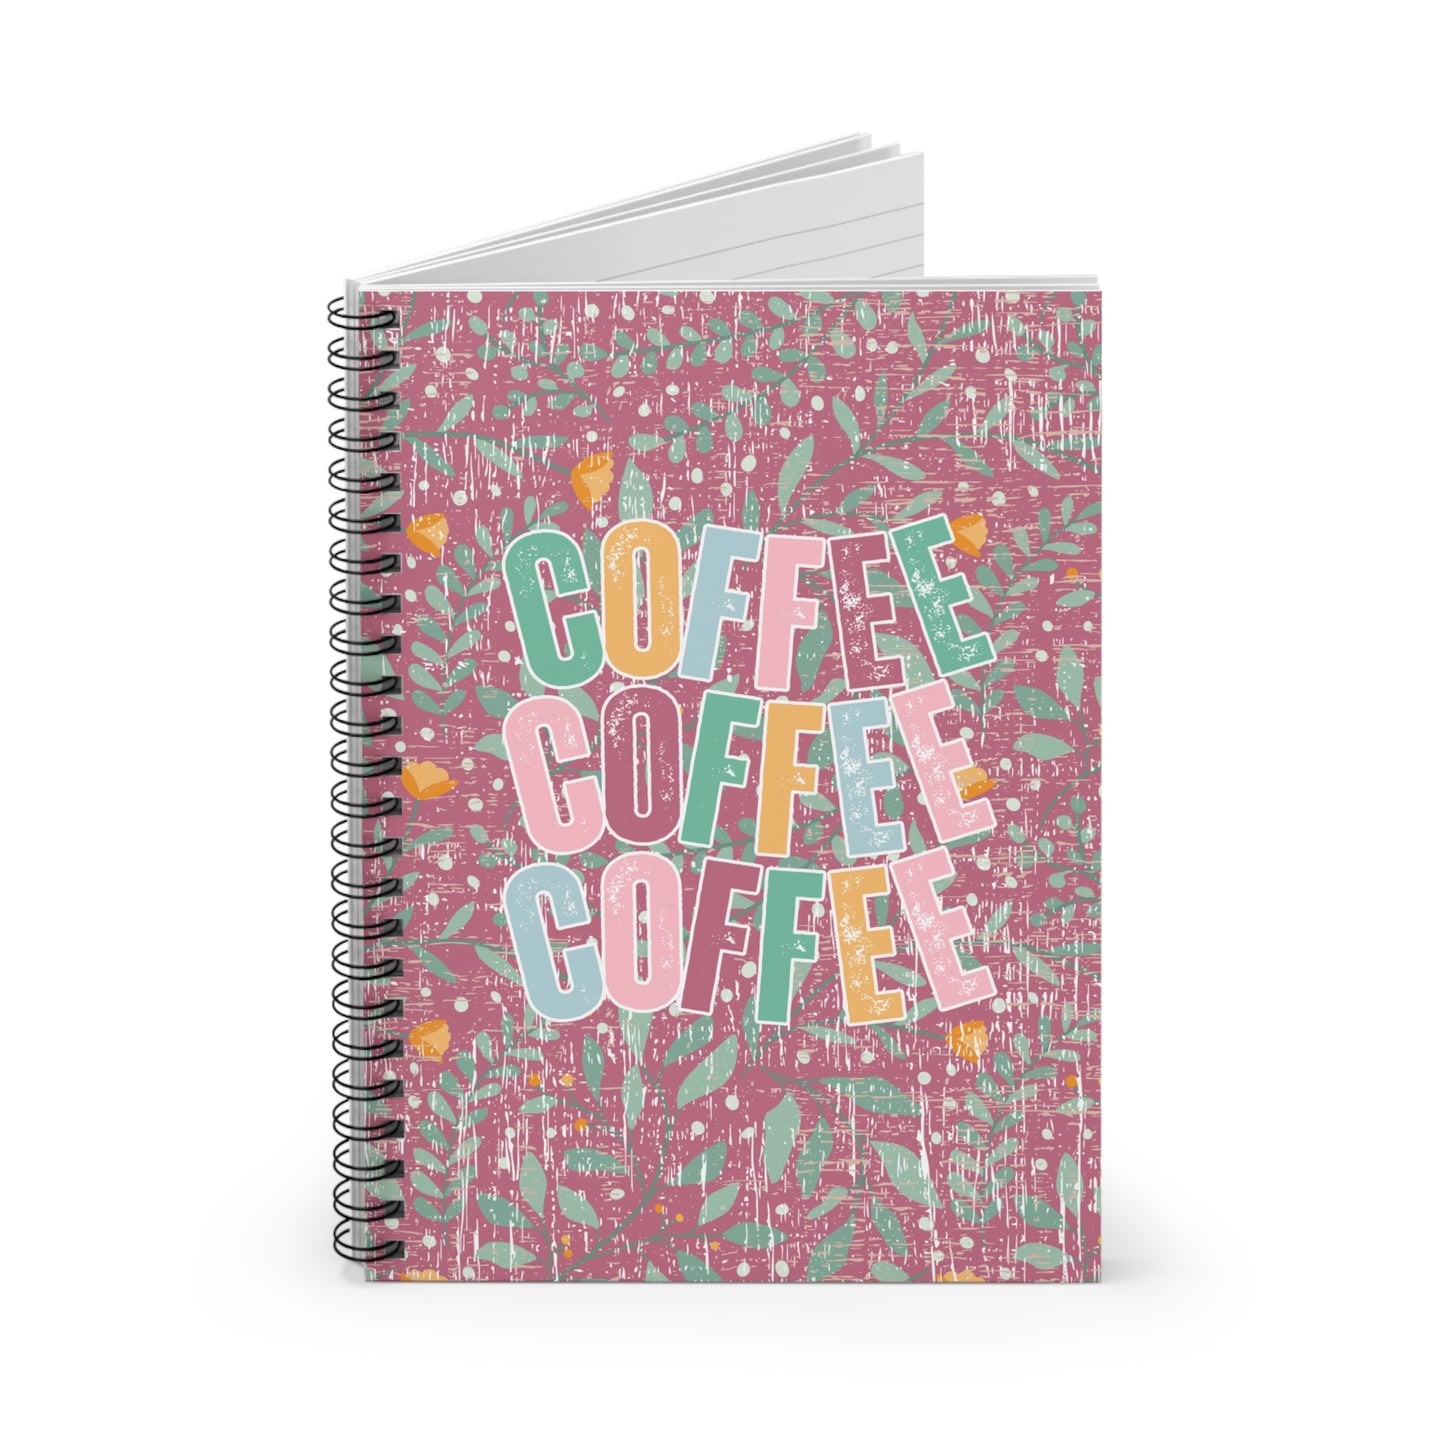 Caffeine Dreams: Ruled Spiral Notebook for Java-Inspired Thoughts